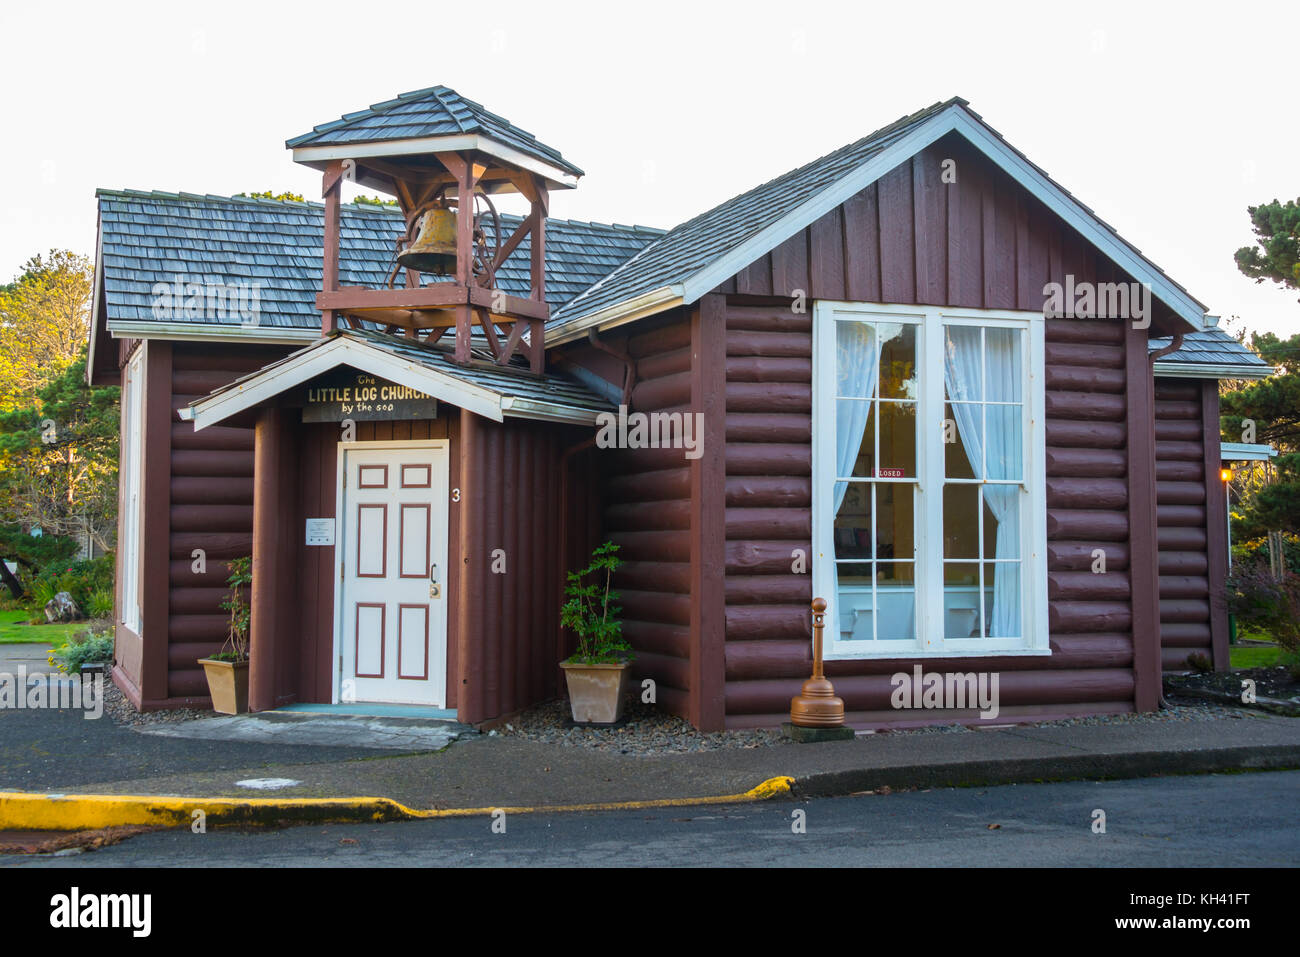 The Little Log Church by the Sea, Yachats, Oregon Museum Tourist Attraction Stock Photo